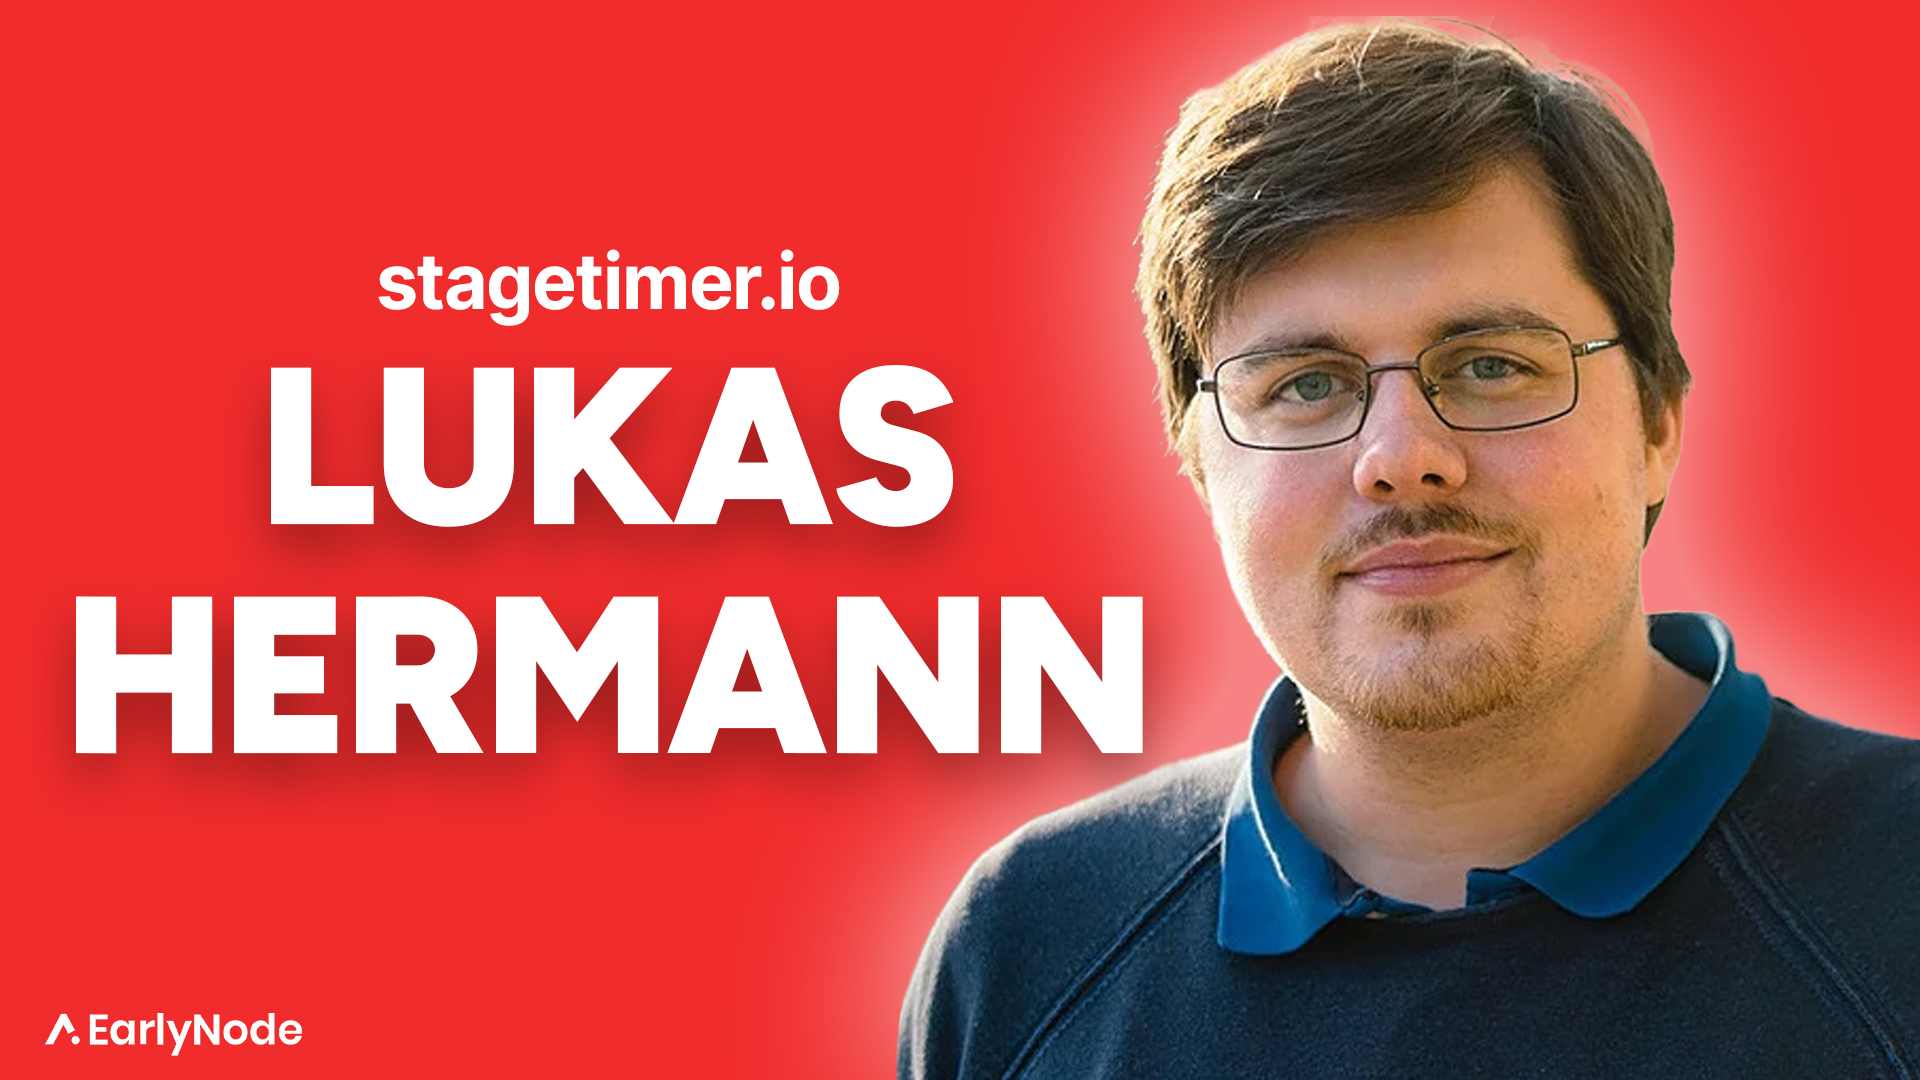 Building a niche SaaS with StageTimer.io Co-Founder Lukas Hermann